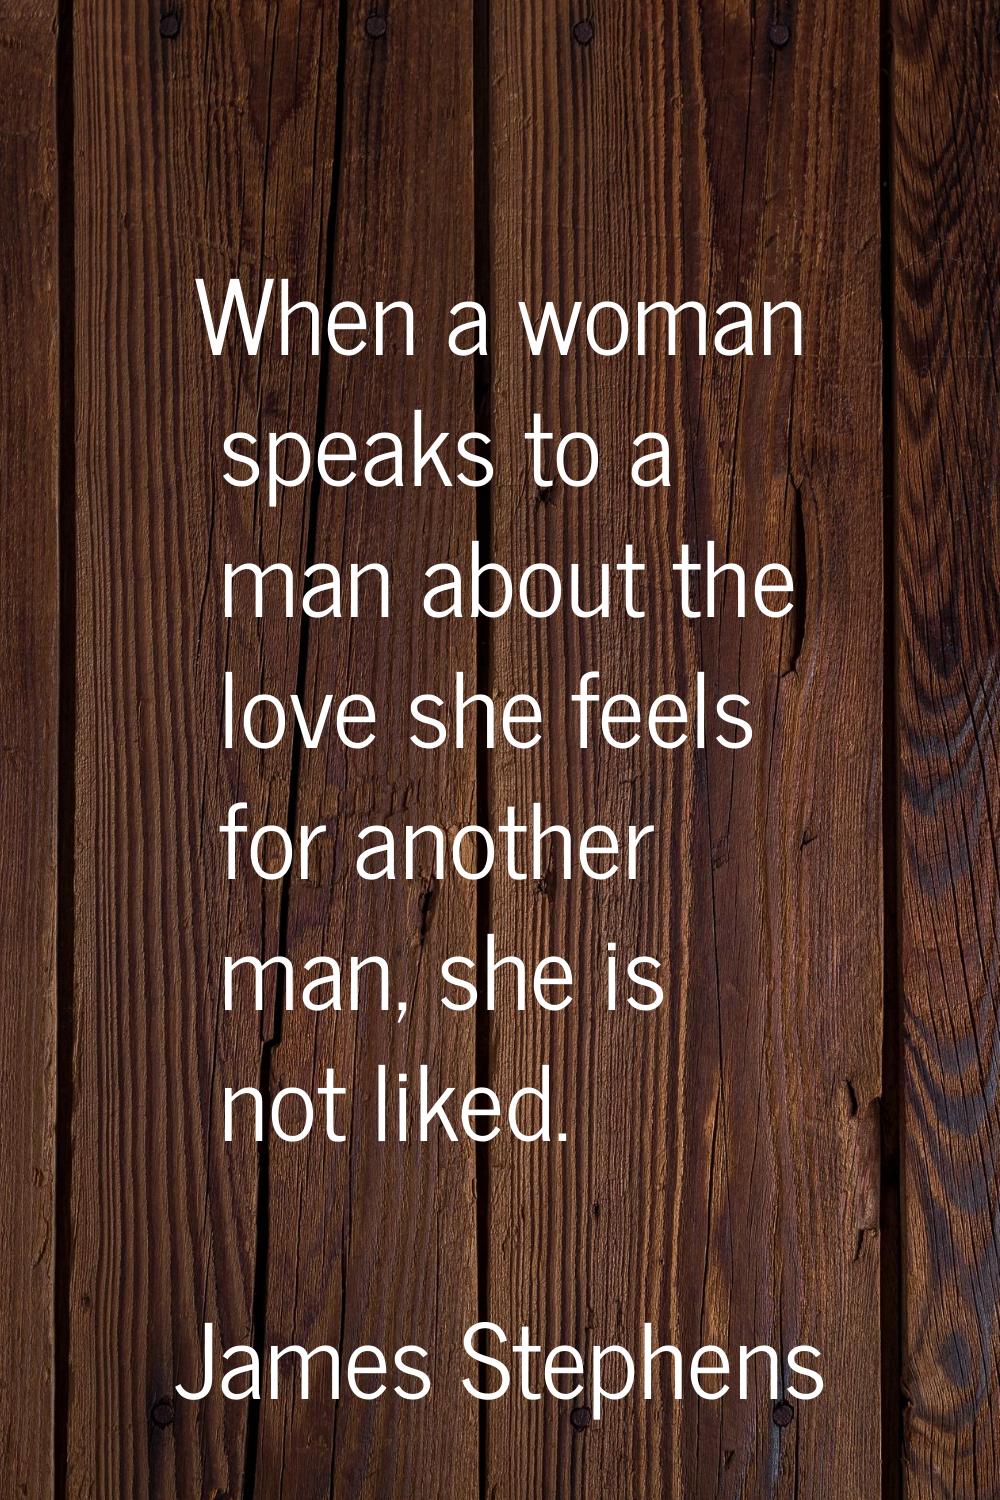 When a woman speaks to a man about the love she feels for another man, she is not liked.